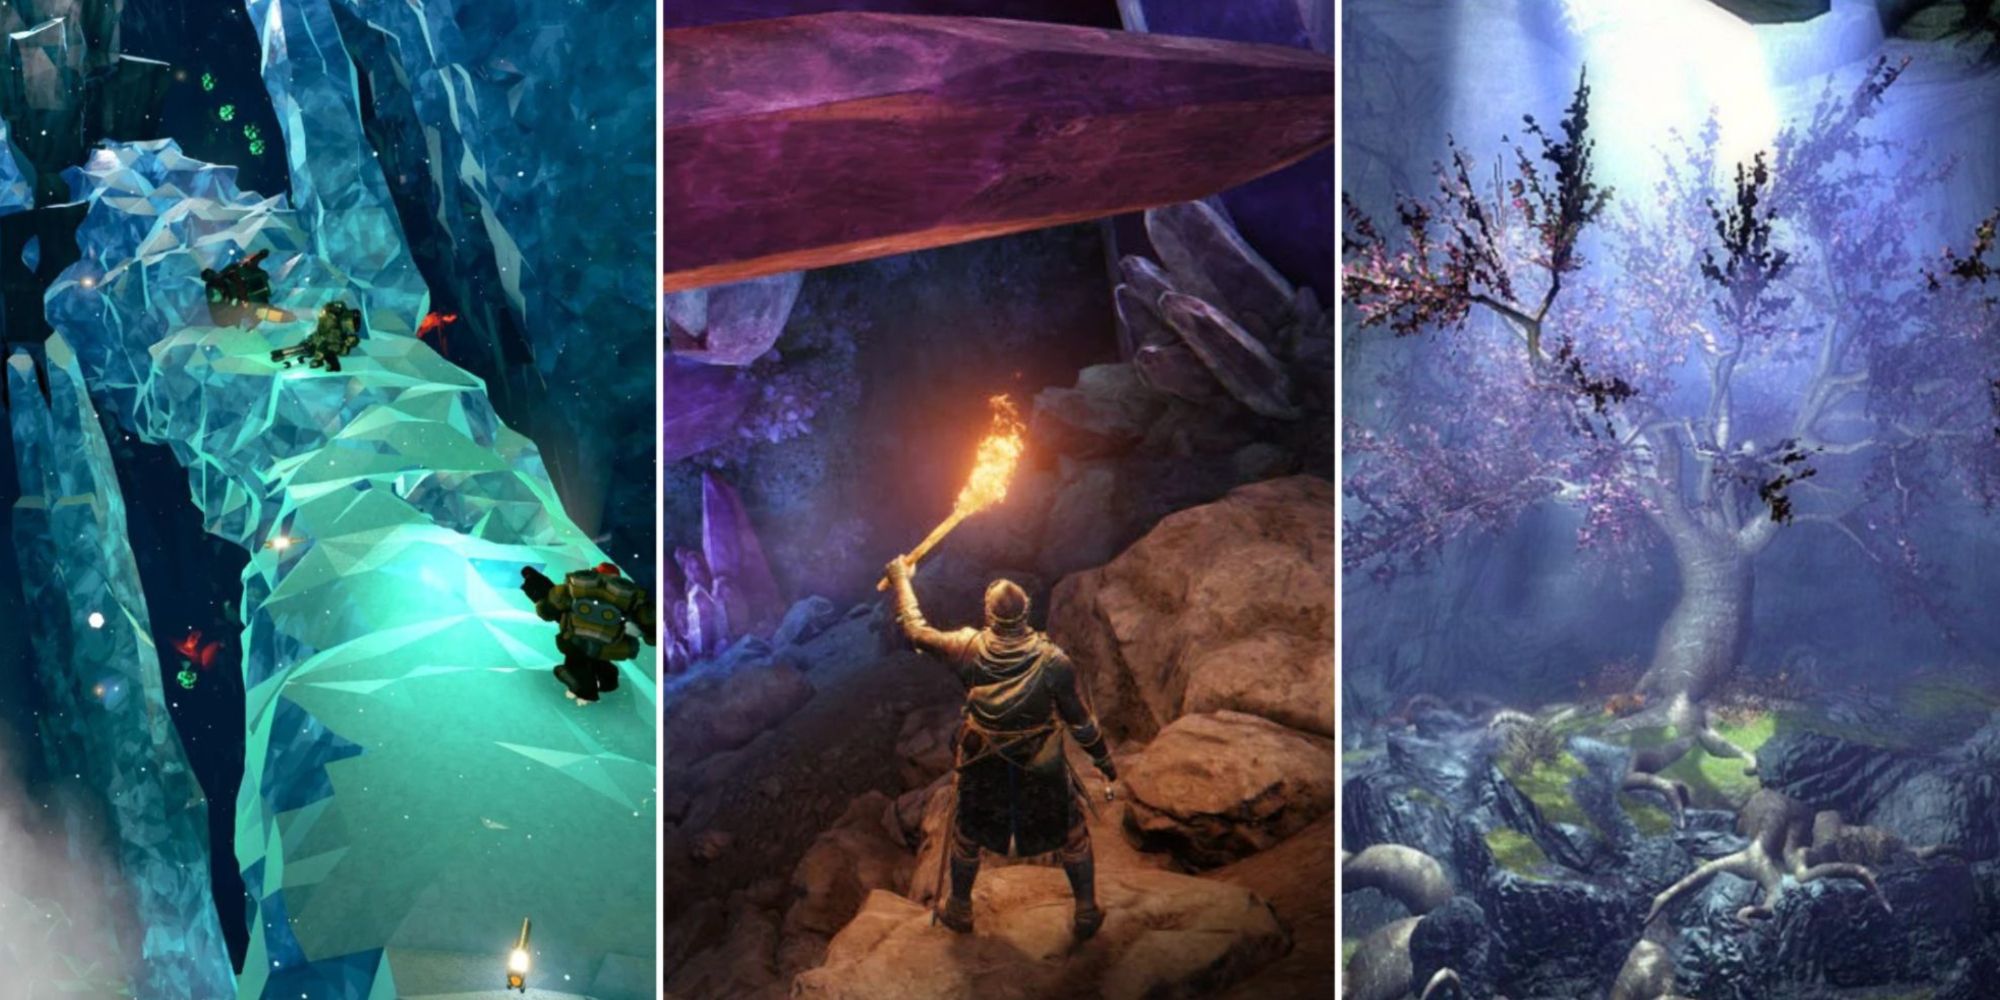 Colage of Iconic Video Game Caves, featuring Deep Rock Galactic, Elden Ring, and Skyrim